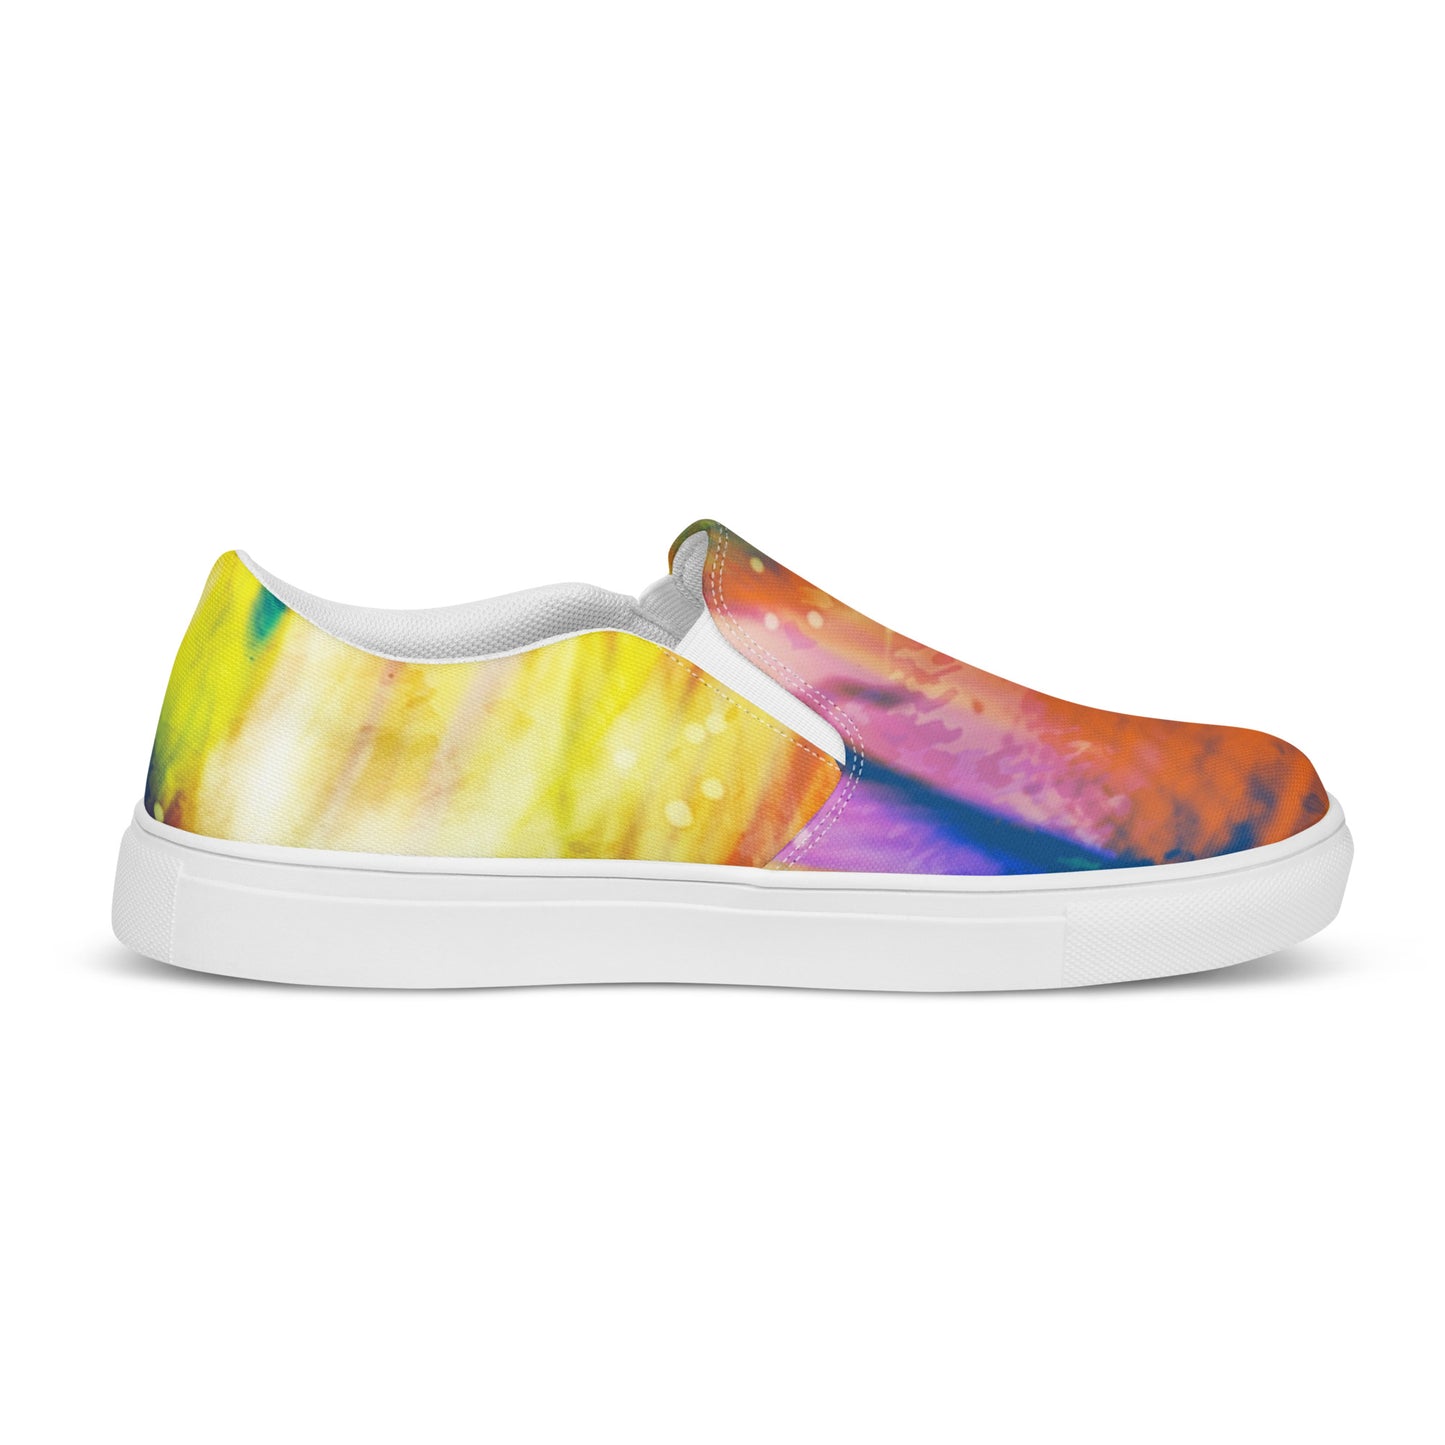 America’s Swag 312 Abstract 2 Women’s slip-on canvas shoes